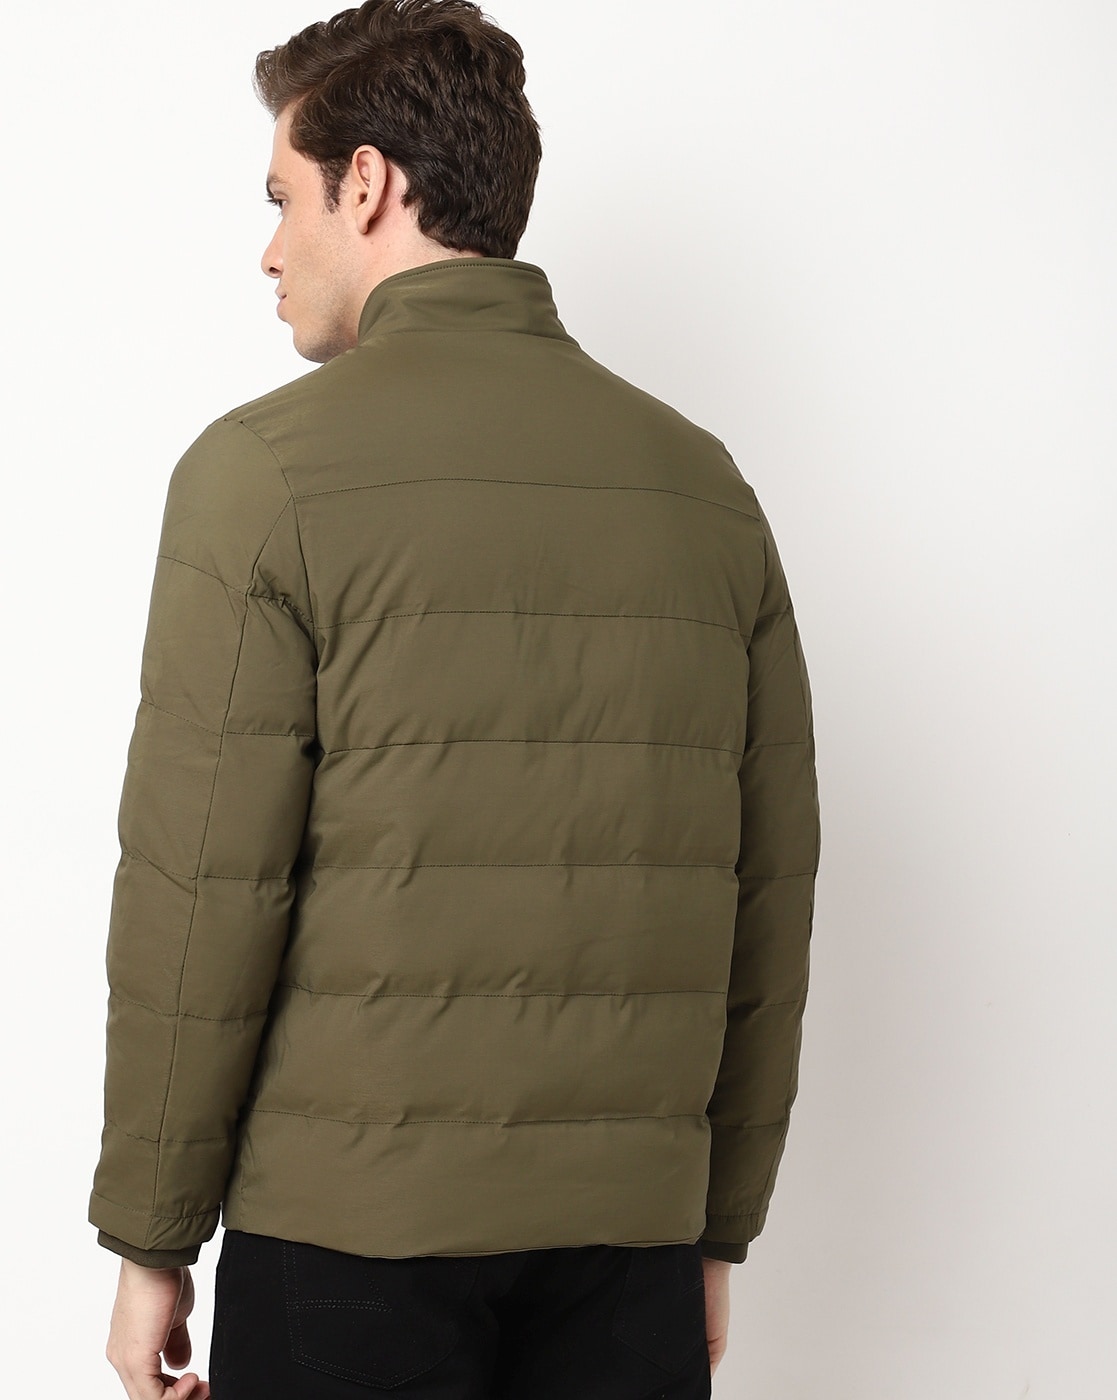 Oak+Fort Oak + Fort LONG PUFFER JACKET $188 Winter Sale: Up to 50% Off.  Prices as marked. OW-9505-W Black Blue Grey;Thyme Green Olive OW-9505-W  $288 $188.00 288.00